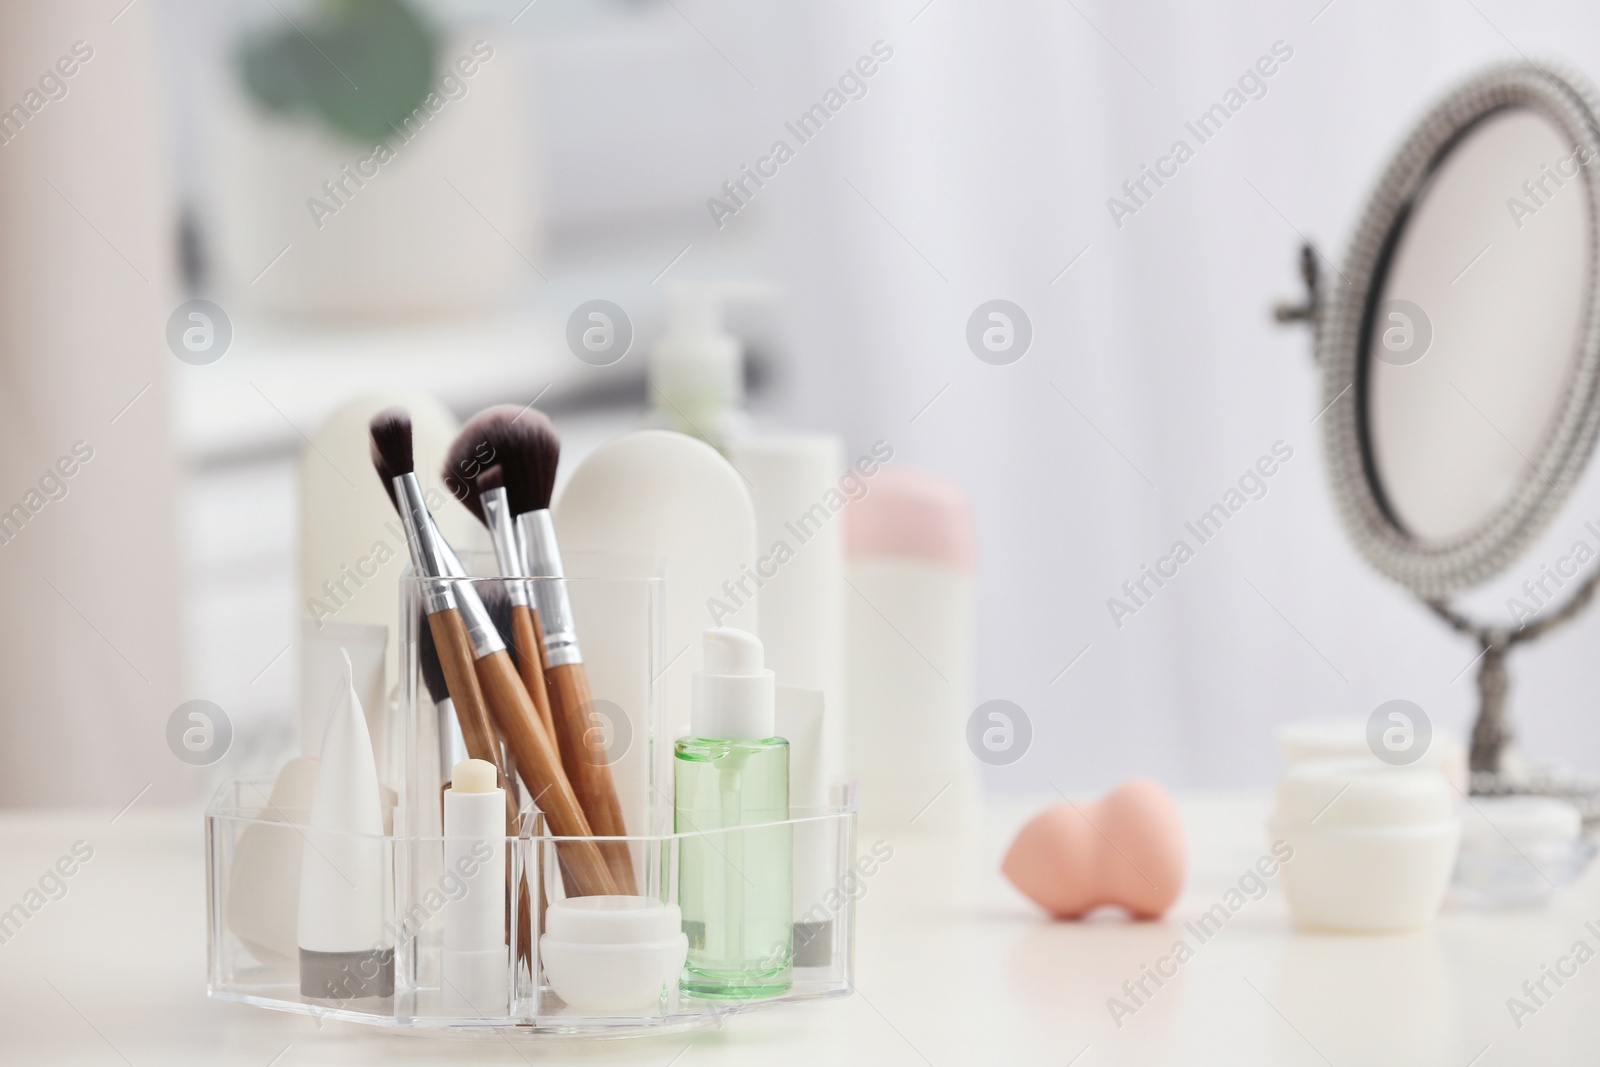 Photo of Organizer with cosmetic products and makeup accessories on table against blurred background. Space for text